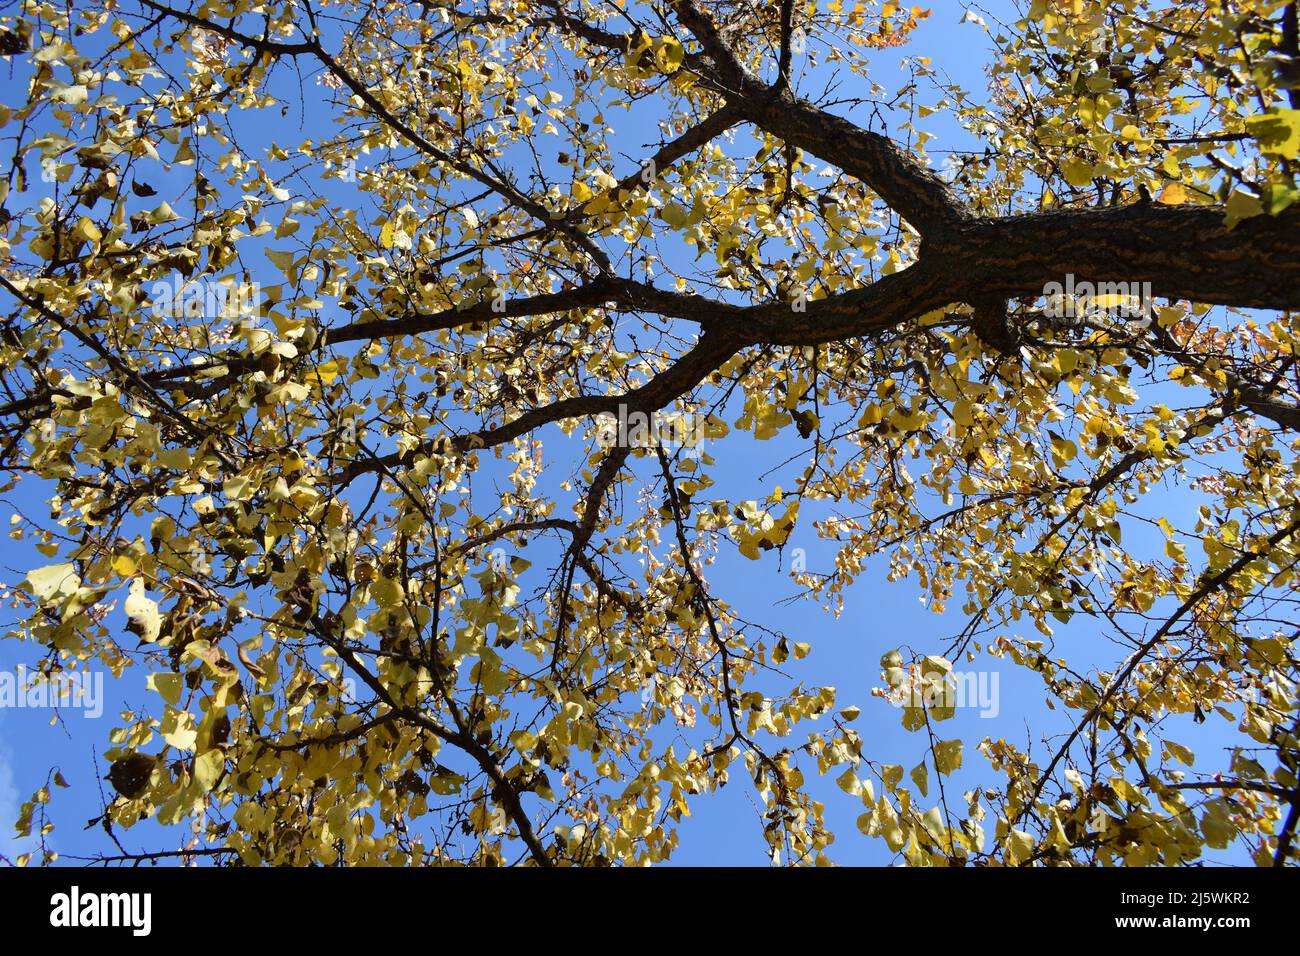 Autum picture of yellow colored leaves on a branches with blue sky in the background. Nice colorful leafs on the beautiful blue sky. Autumn leaves bac Stock Photo